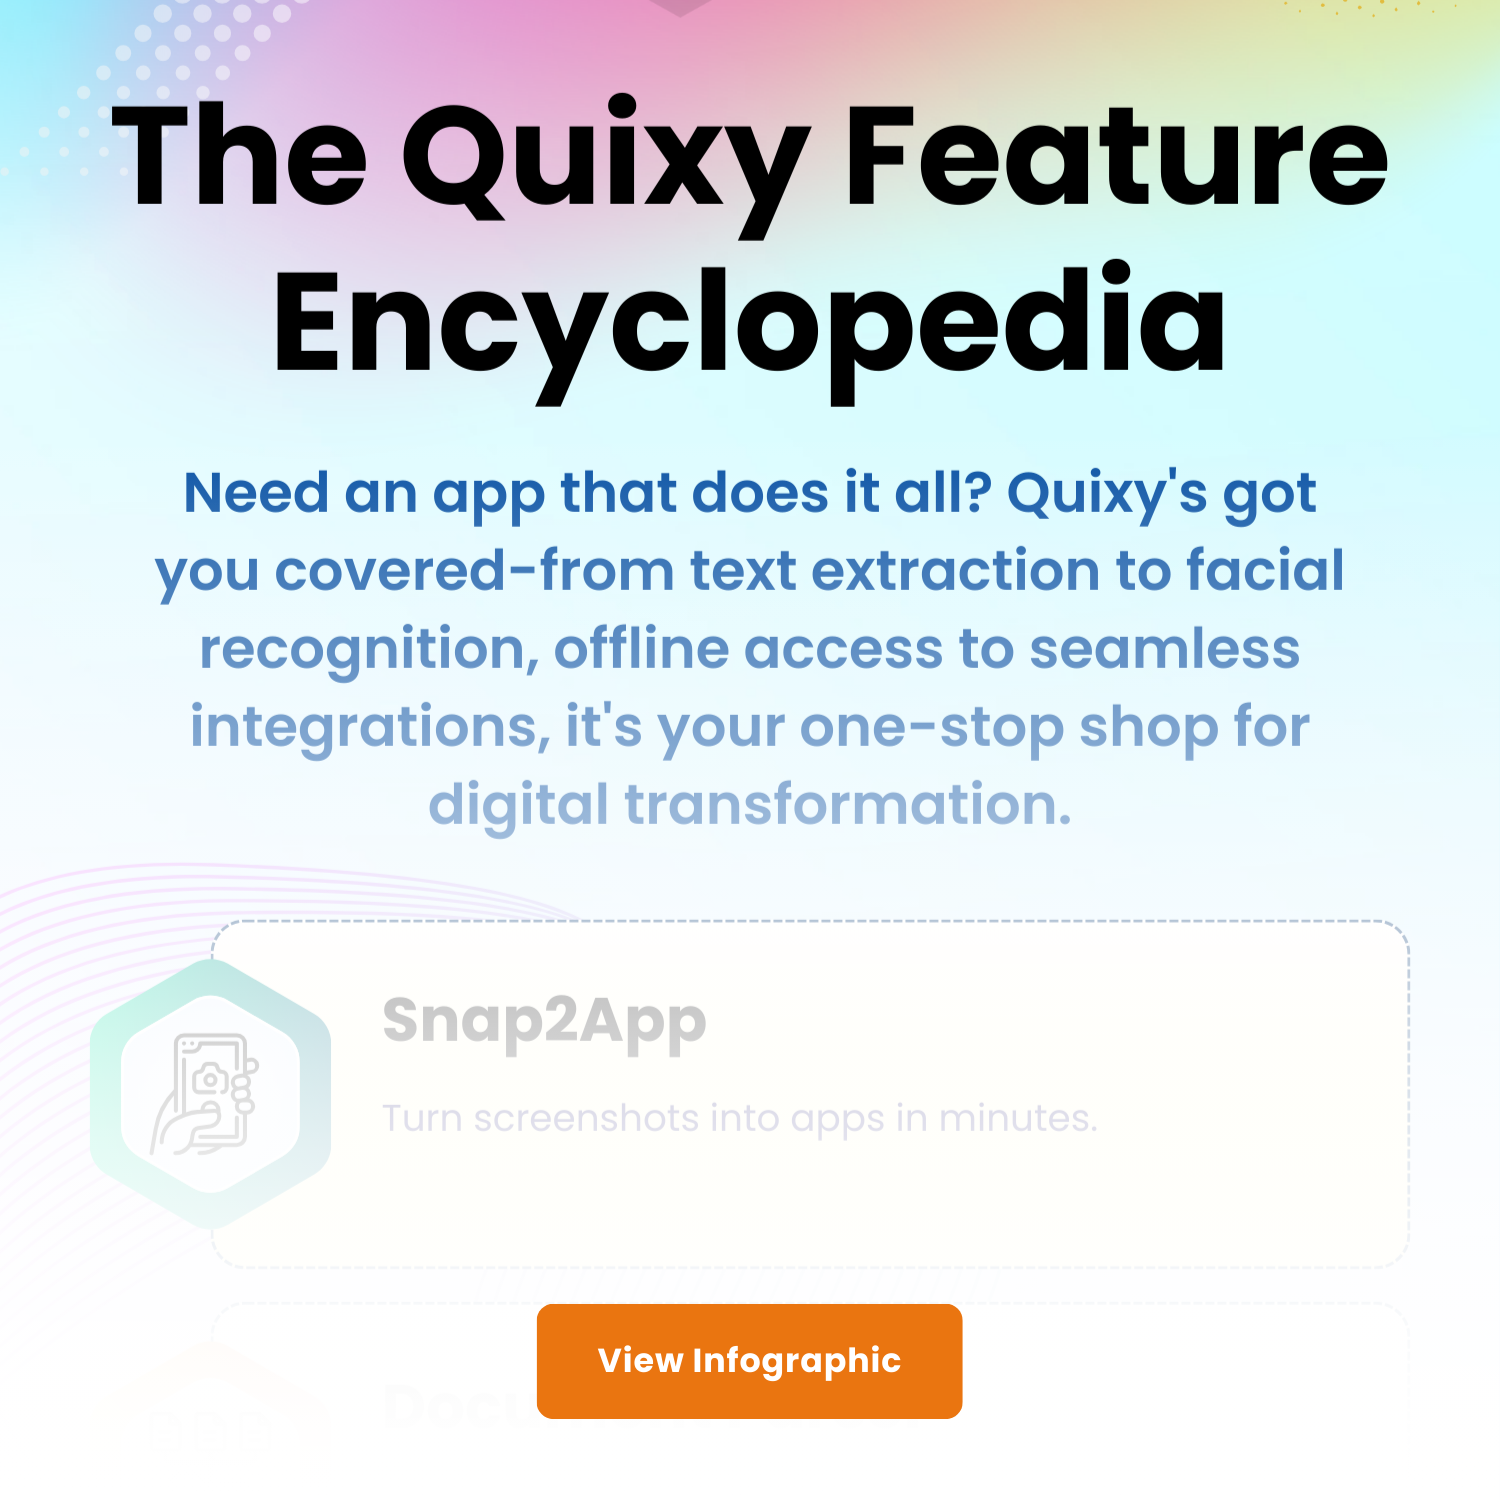 Quixy Feature Encyclopedia infographic